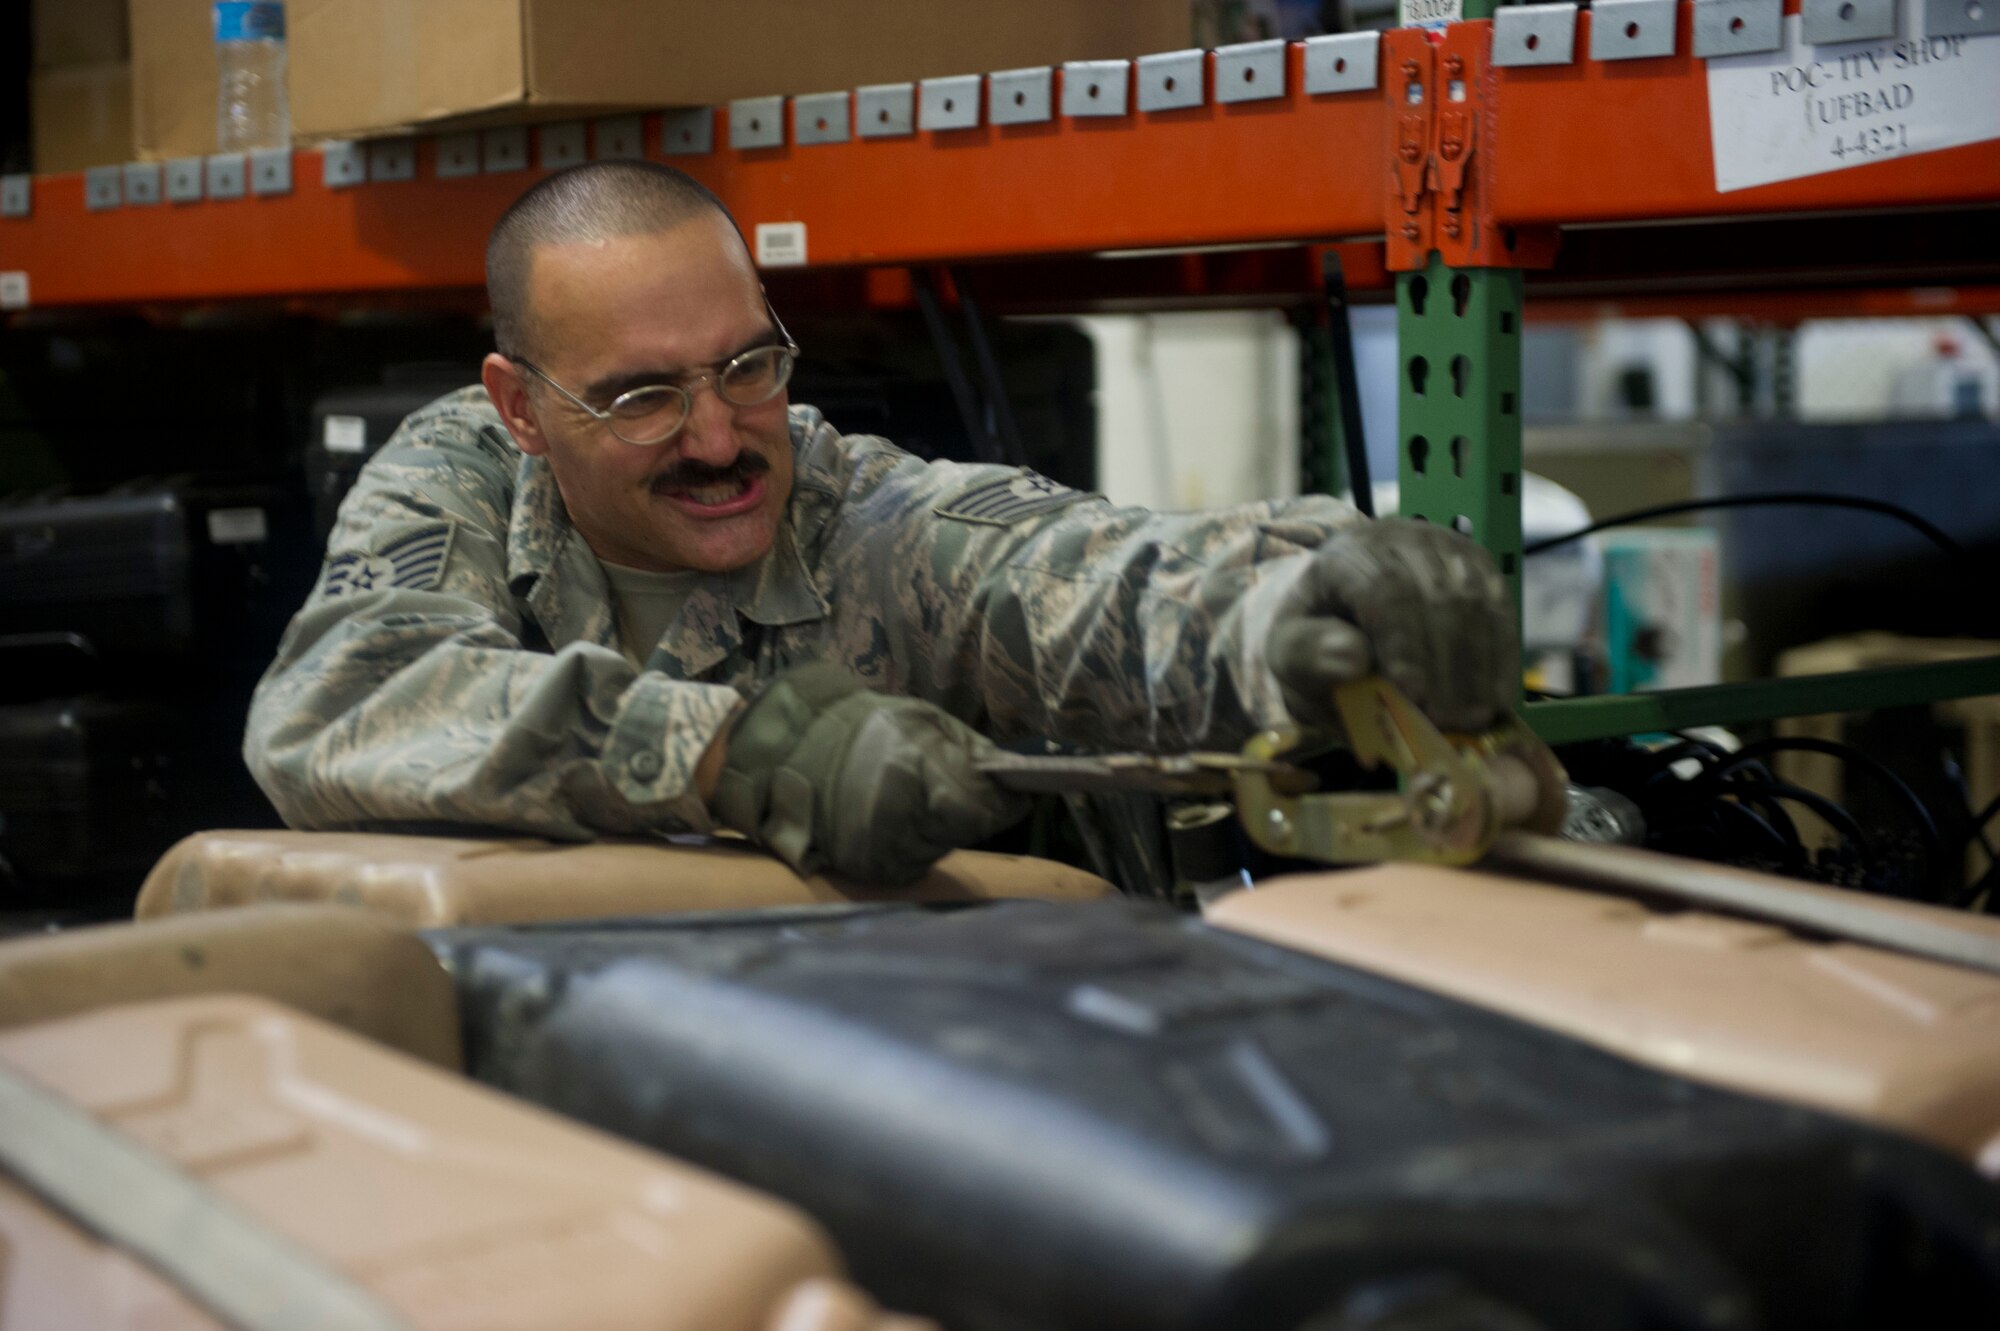 JOINT BASE MCGUIRE-DIX-LAKEHURST, N.J. - Tech. Sgt. Matthew Powers, 819th Global Support Squadron, secures equipment to help clean out the Global Reach Deployment Center, here, Aug. 7, 2013. (U.S. Air Force photo by Staff Sgt. Gustavo Gonzalez)